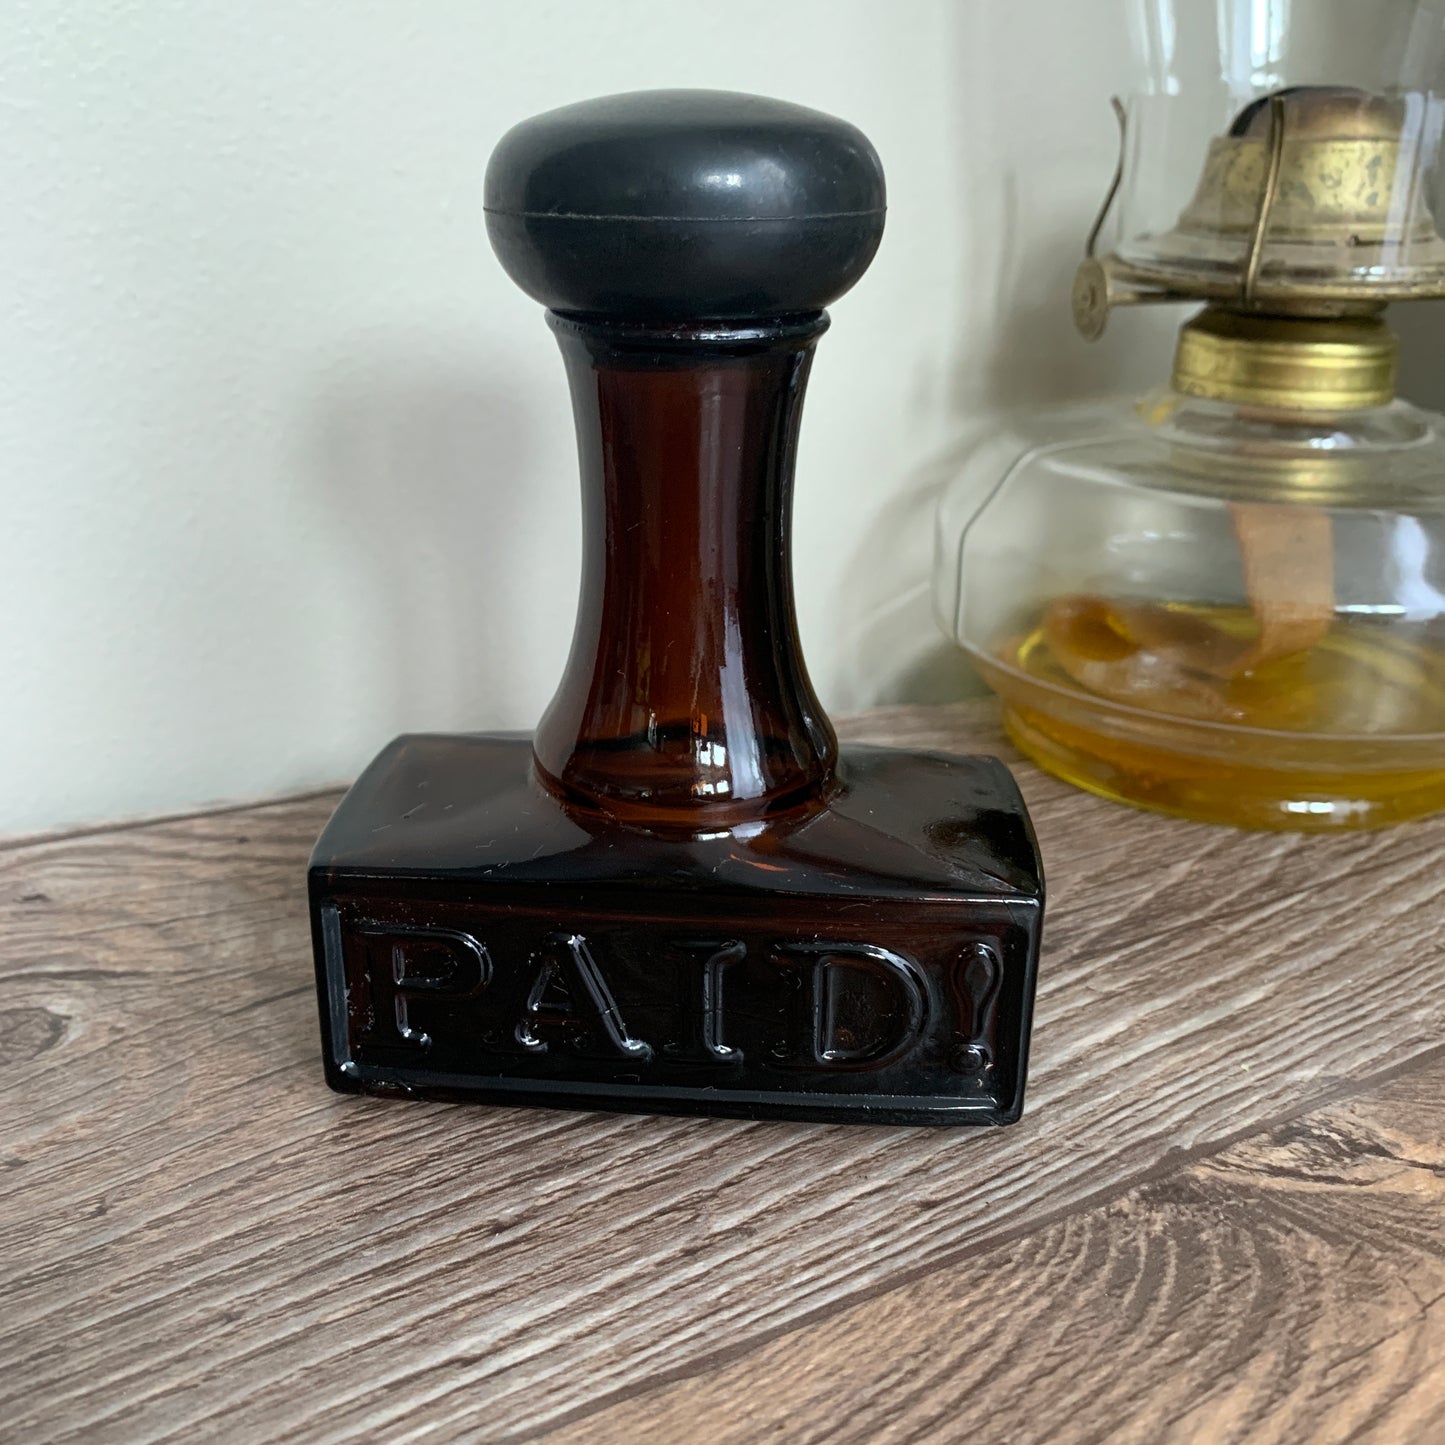 Vintage Avon Cologne Bottle PAID Stamp Co Worker Gifts